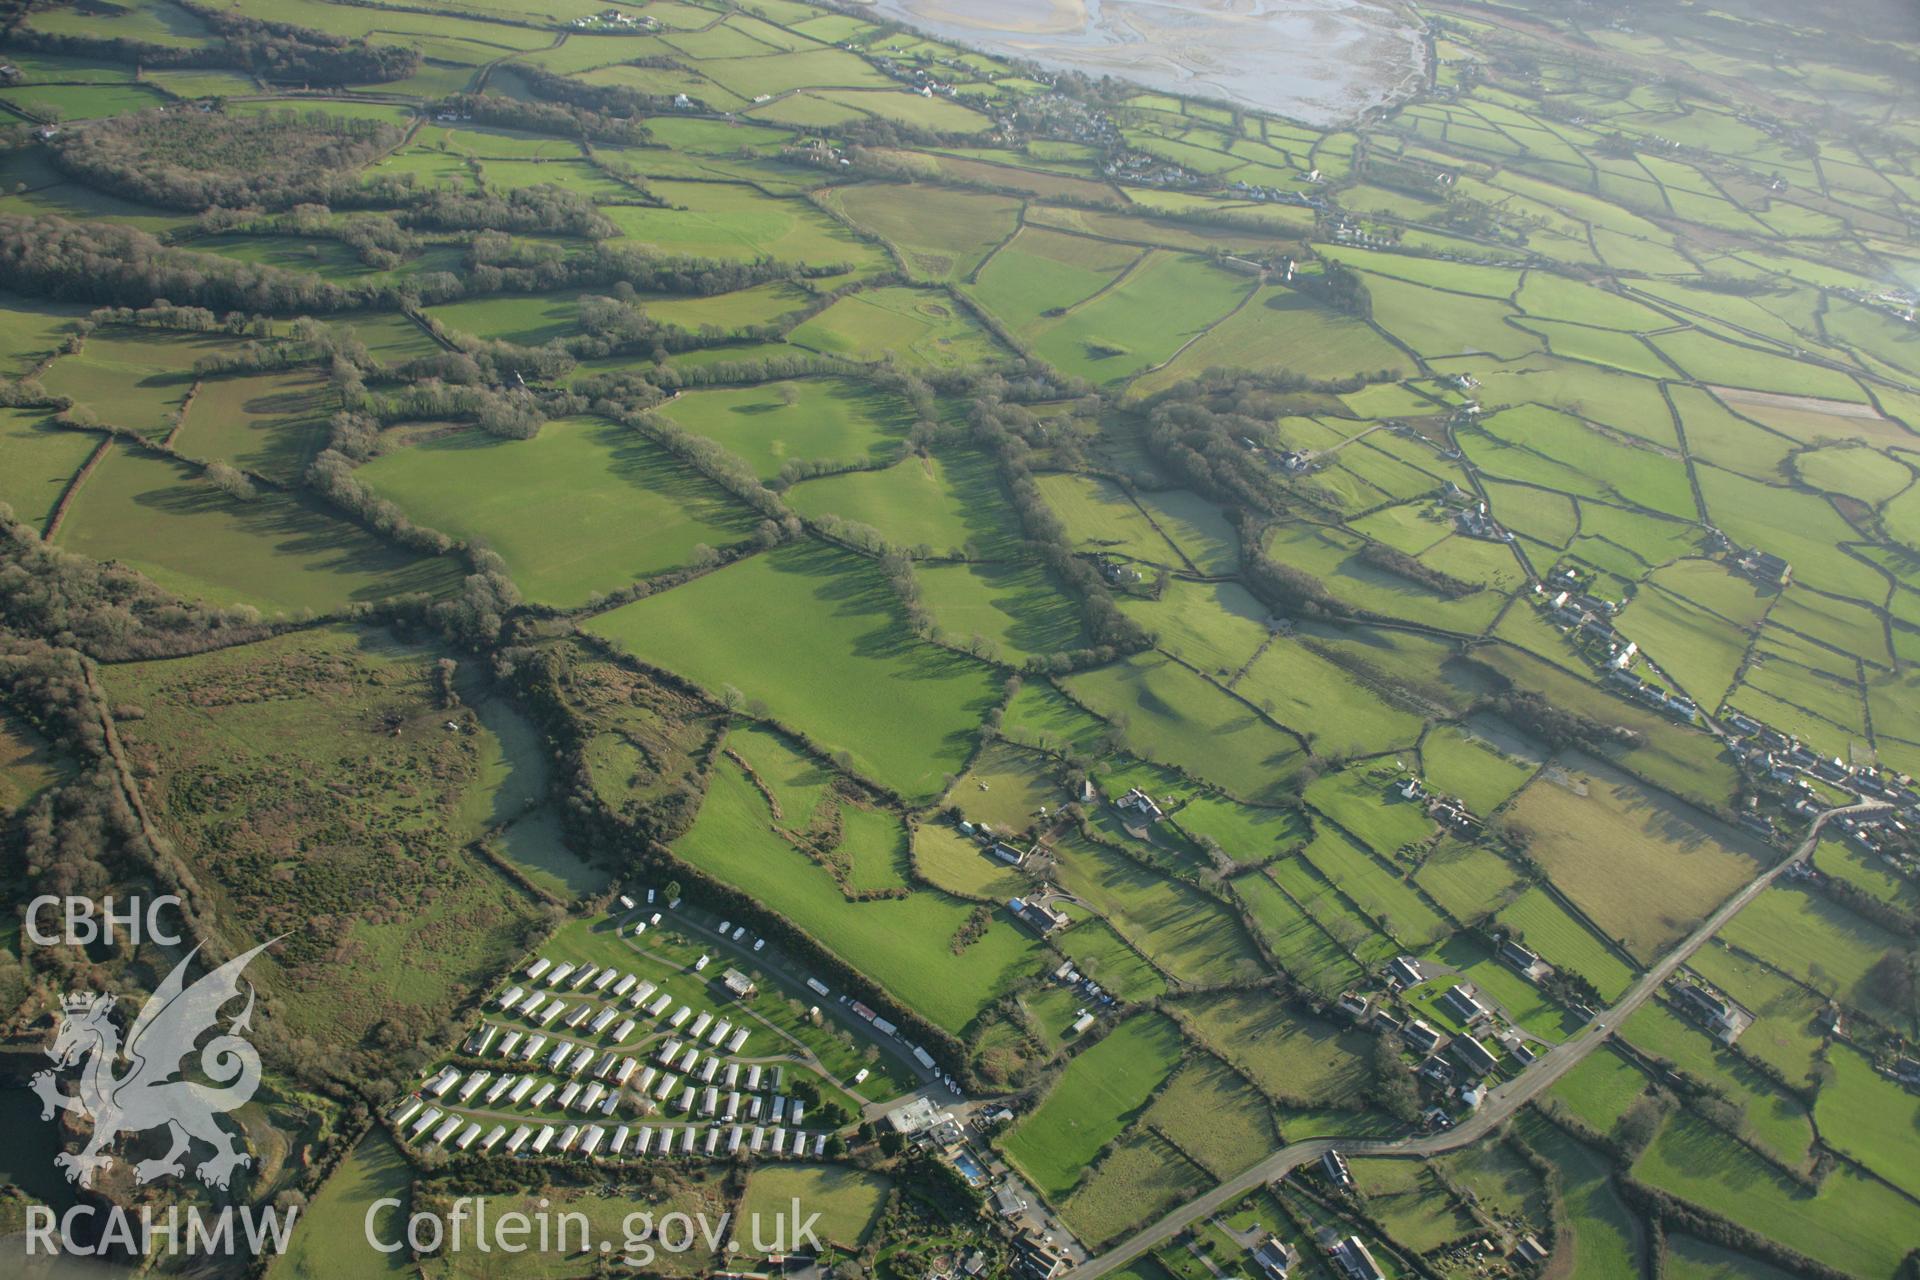 RCAHMW colour oblique aerial photograph of the Viking settlement at Glyn, Llanbedrgoch. Taken on 25 January 2007 by Toby Driver